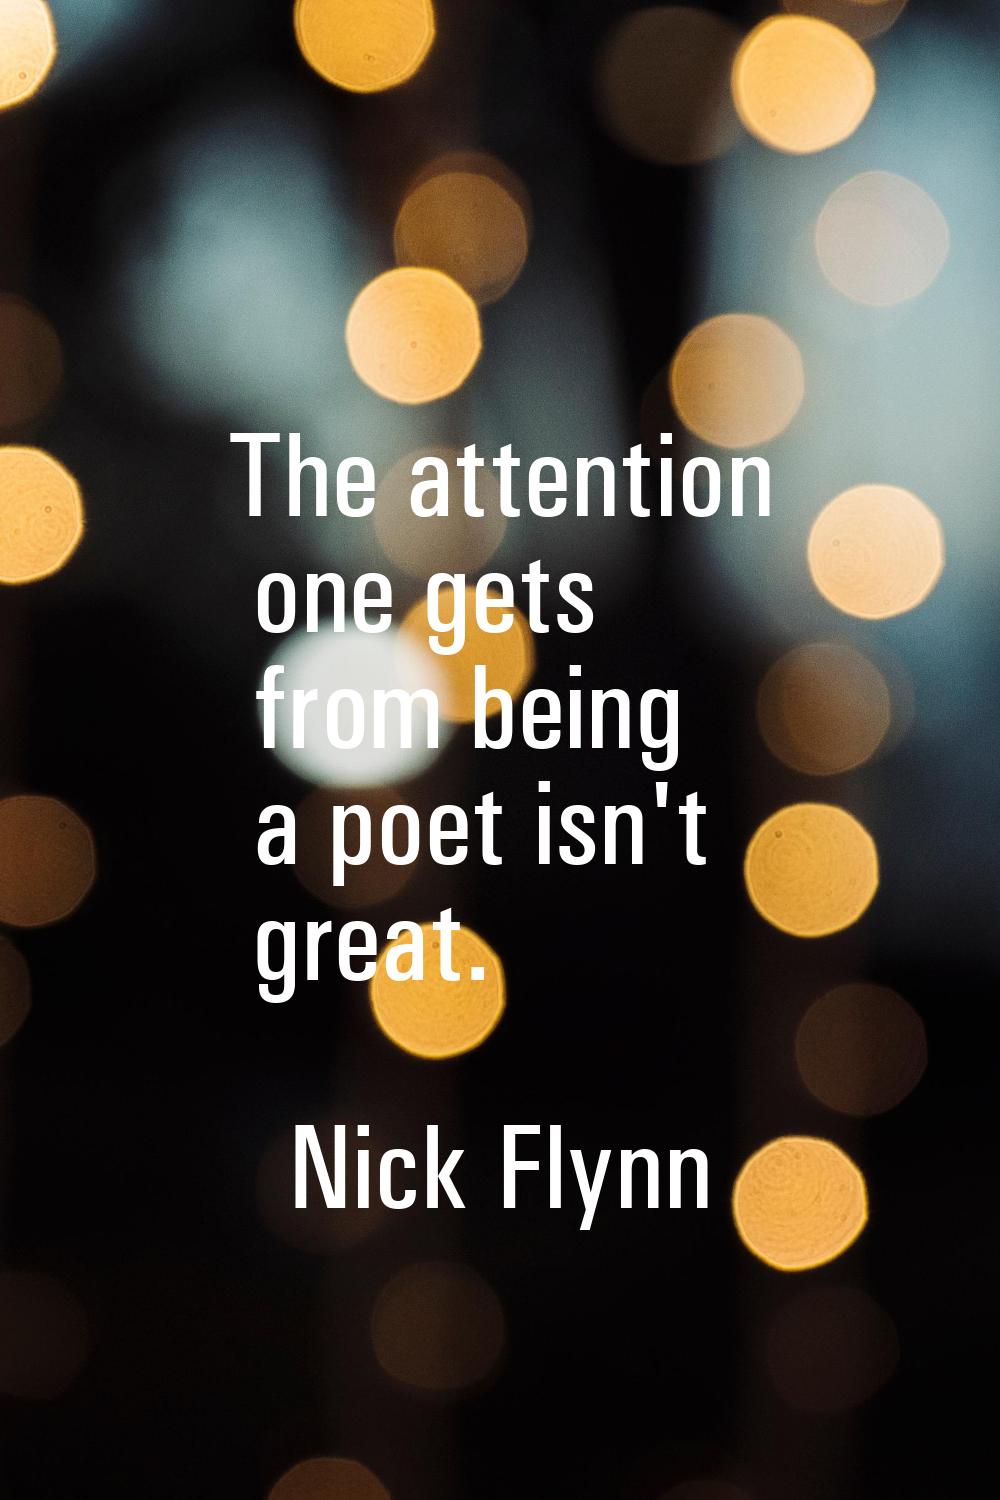 The attention one gets from being a poet isn't great.